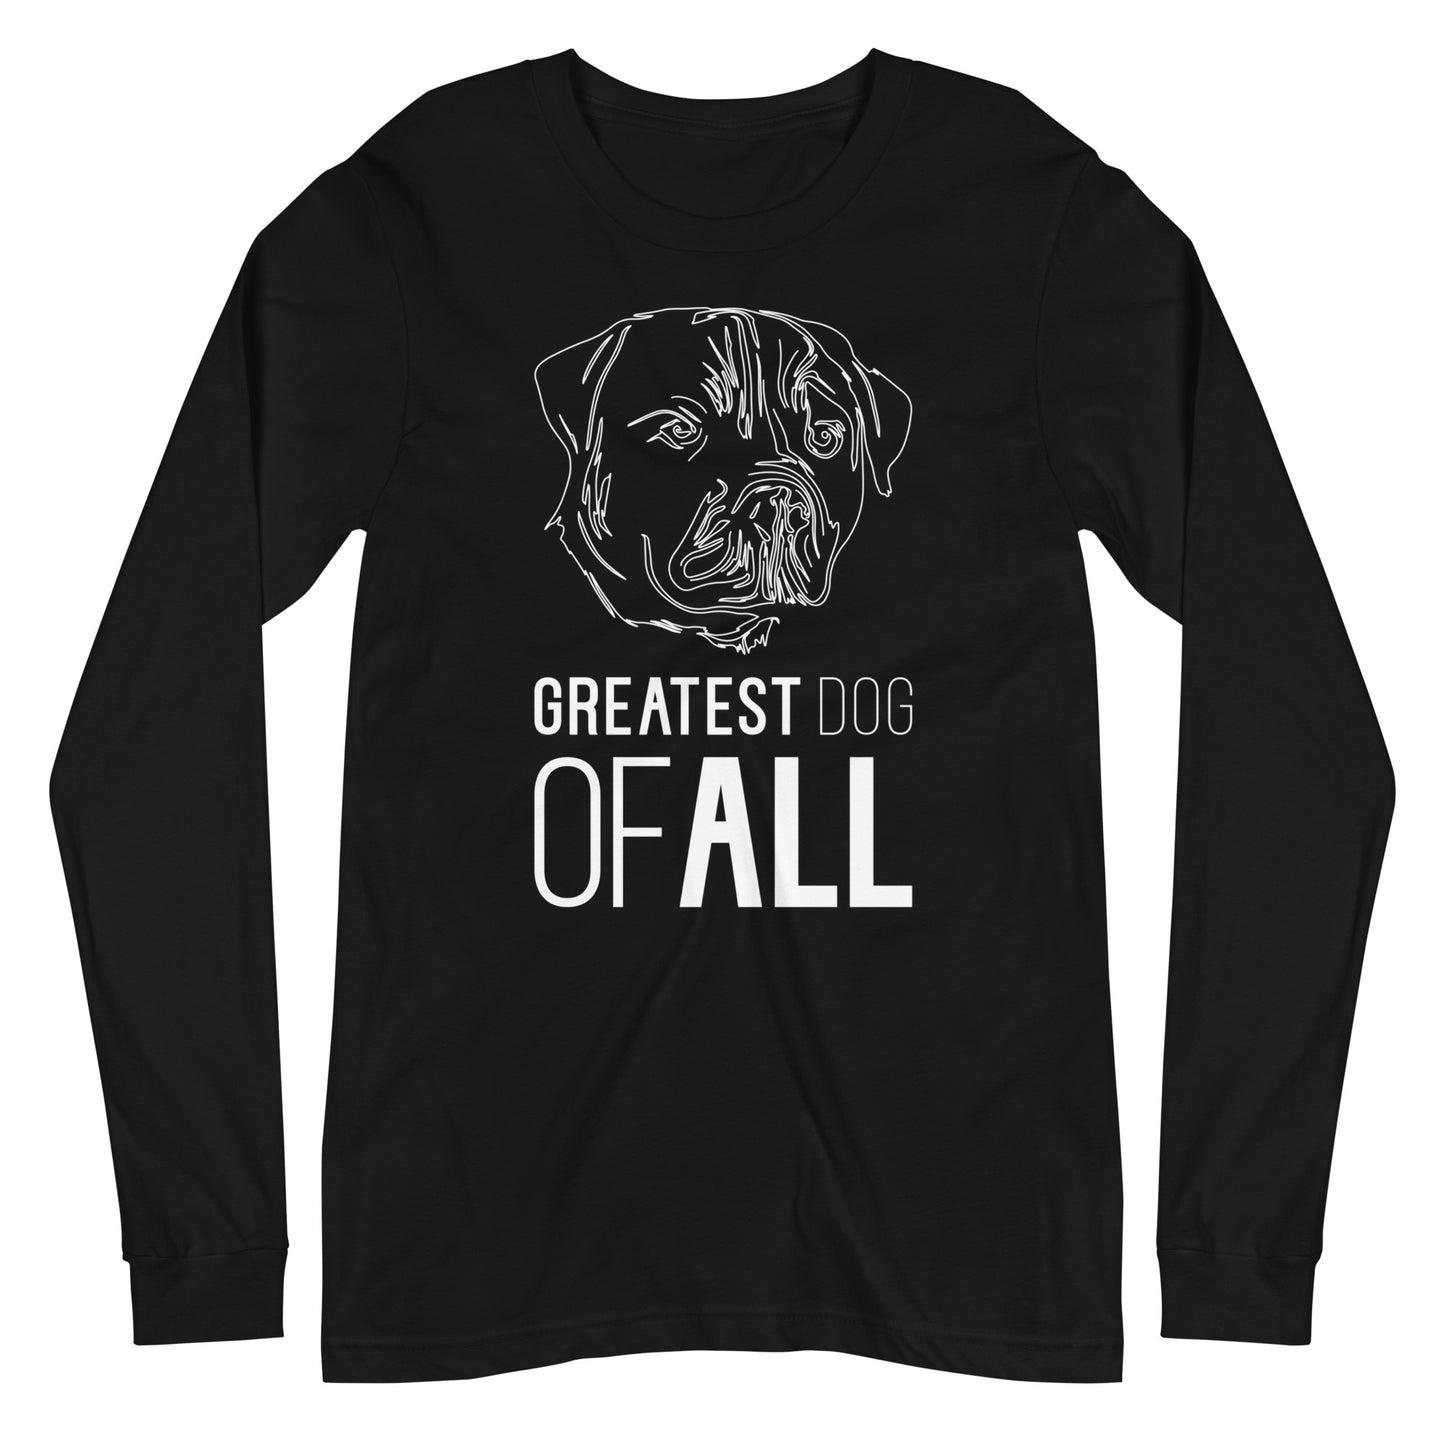 White line Rottweiler face with Greatest Dog of All caption on unisex black long sleeve t-shirt